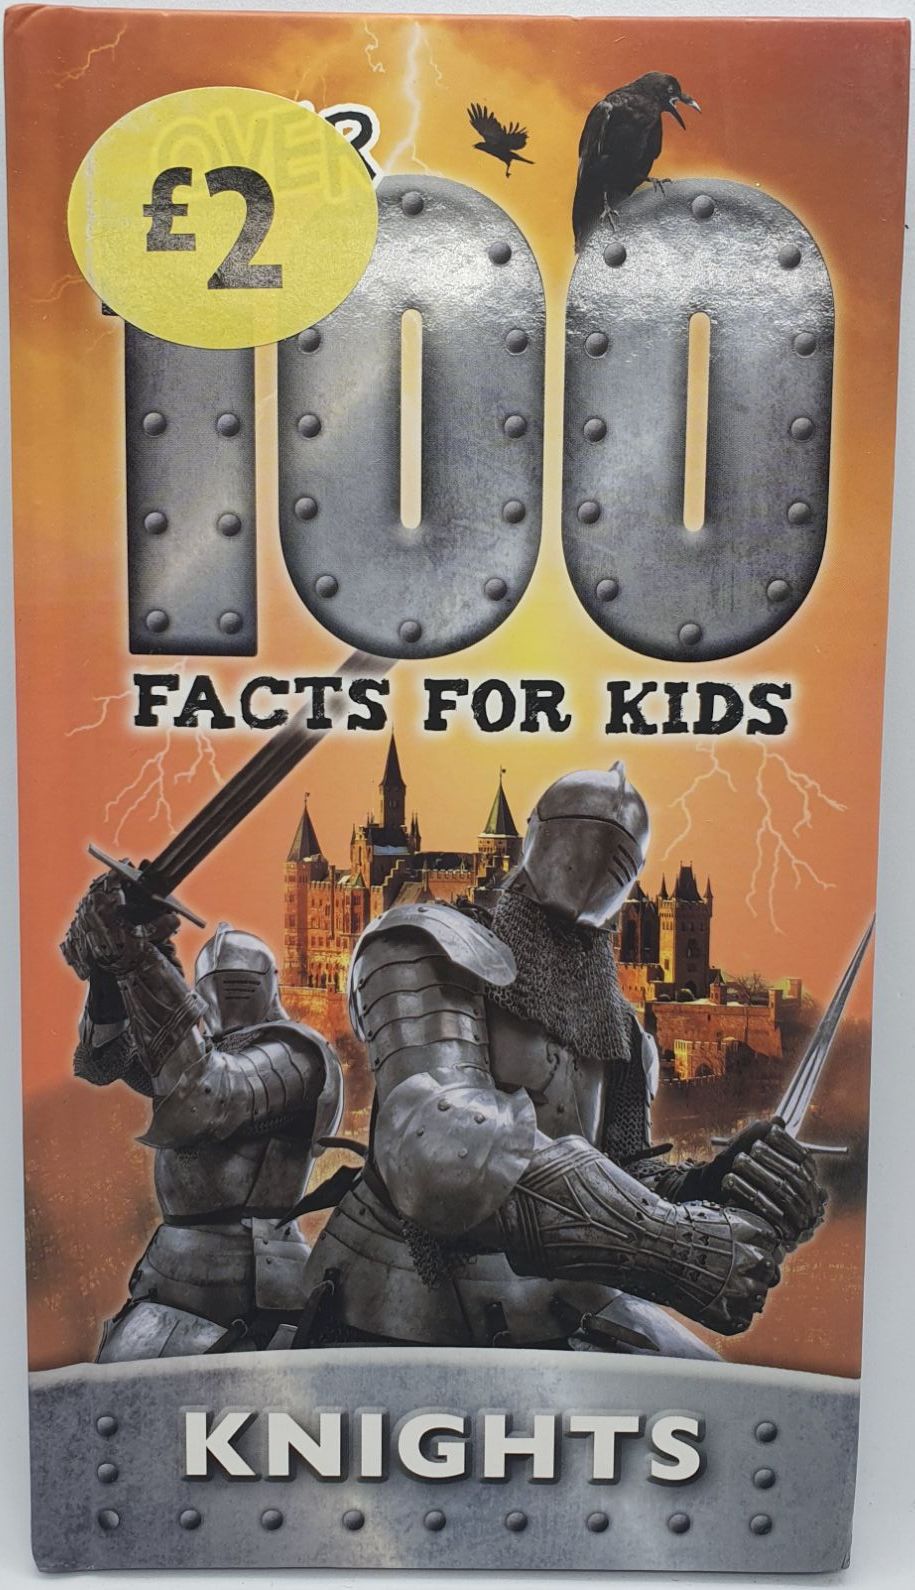 Over 100 Facts For Kids: Knights